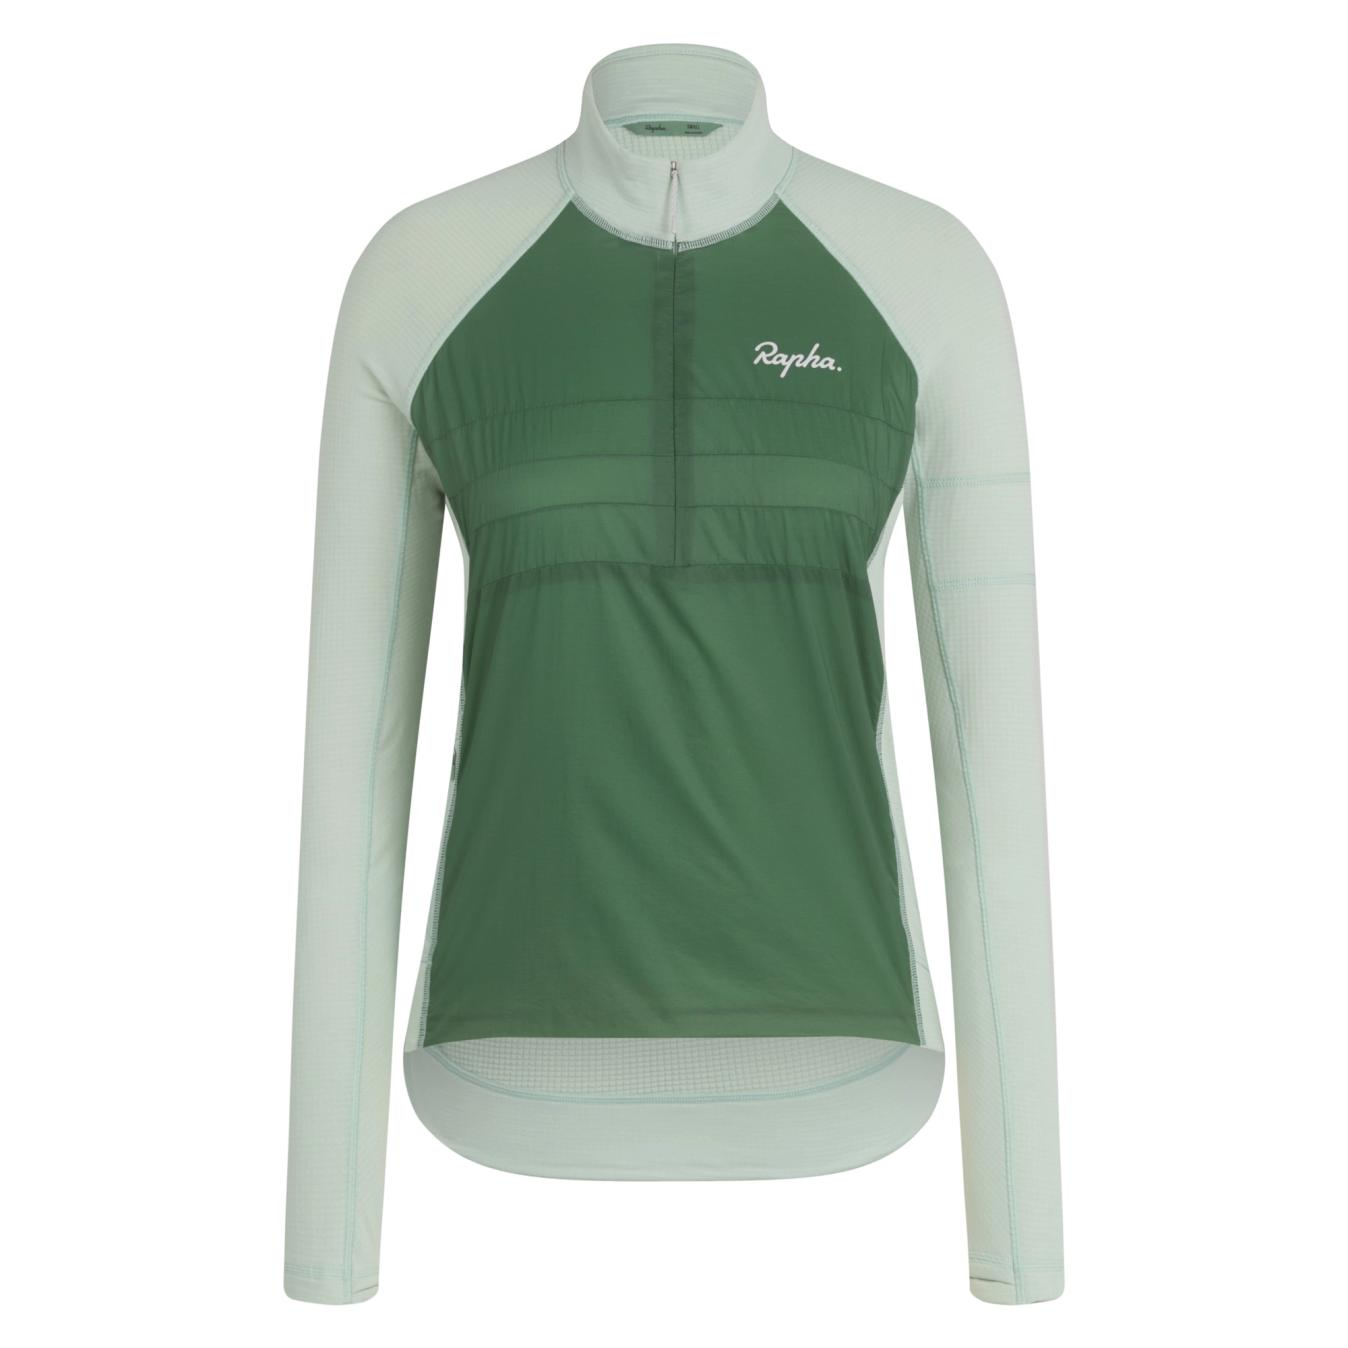 There is also women's zip neck pullover with the same features as the men's